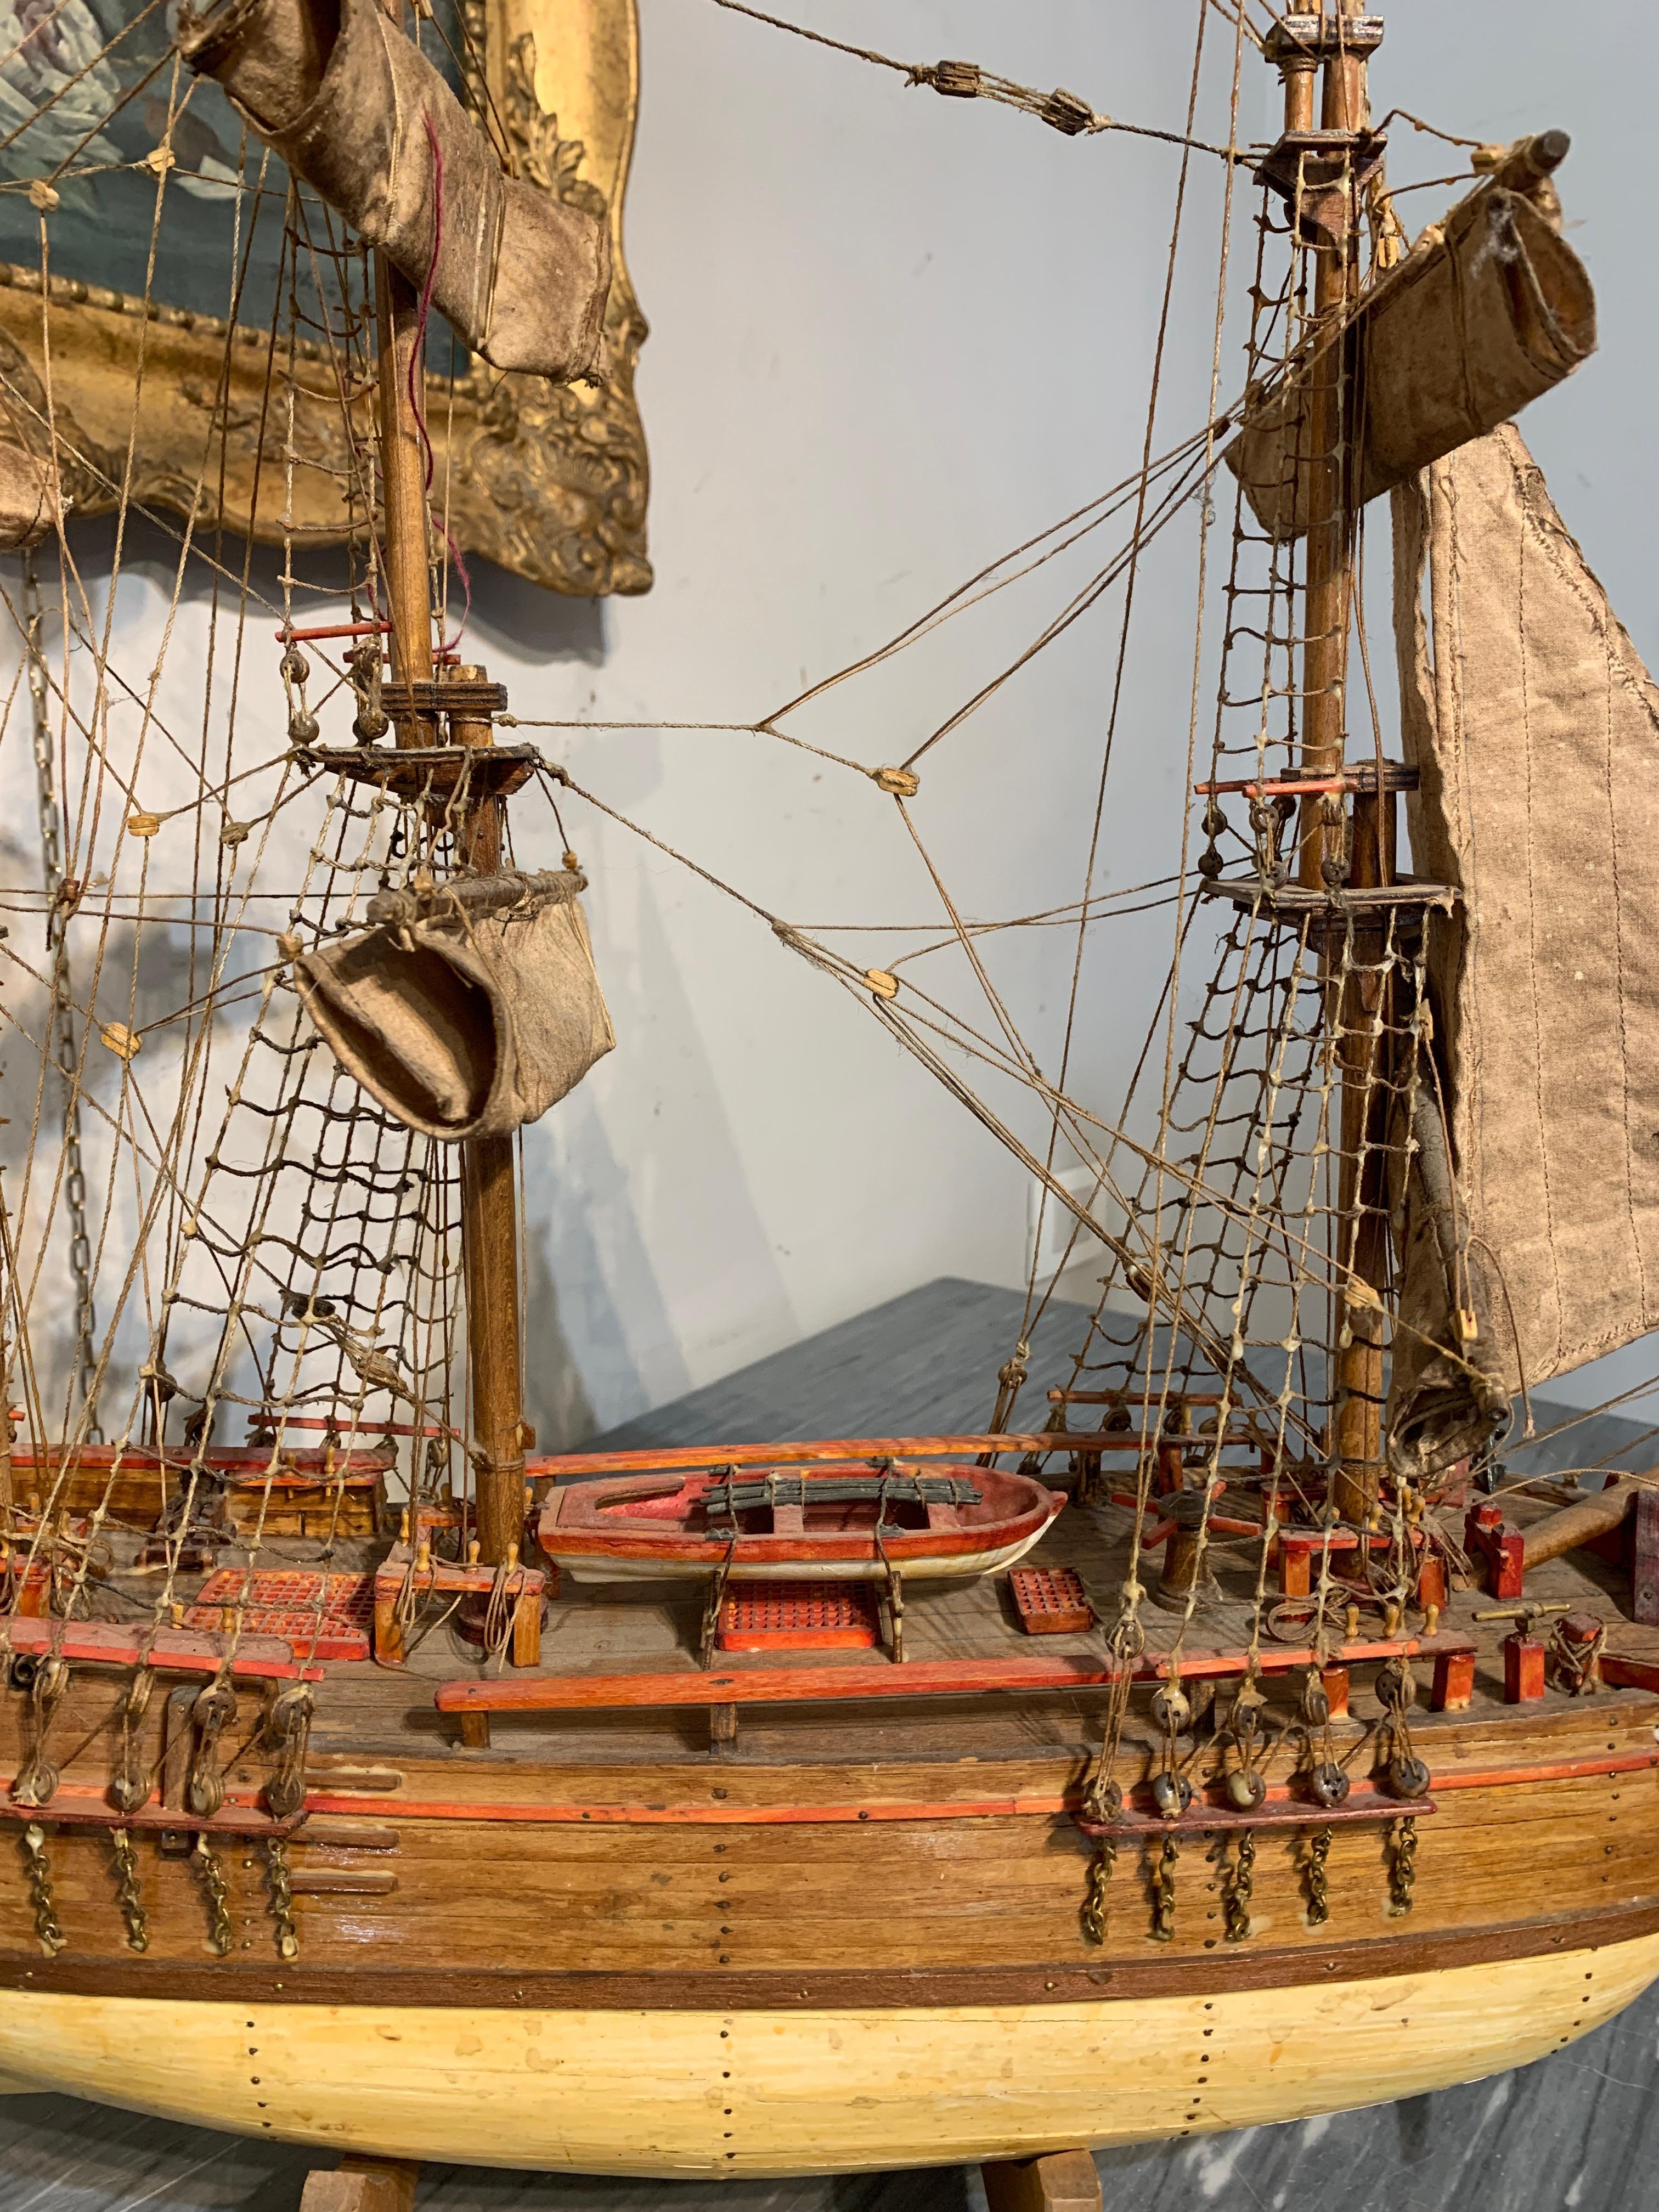 Small model of a sailing ship depicting the famous English merchant ship HMS Bounty. The model and its details are handmade, with great care and refinement (lifeboat, ropes, sails, anchor). The model can be attributed to English manufacture in the